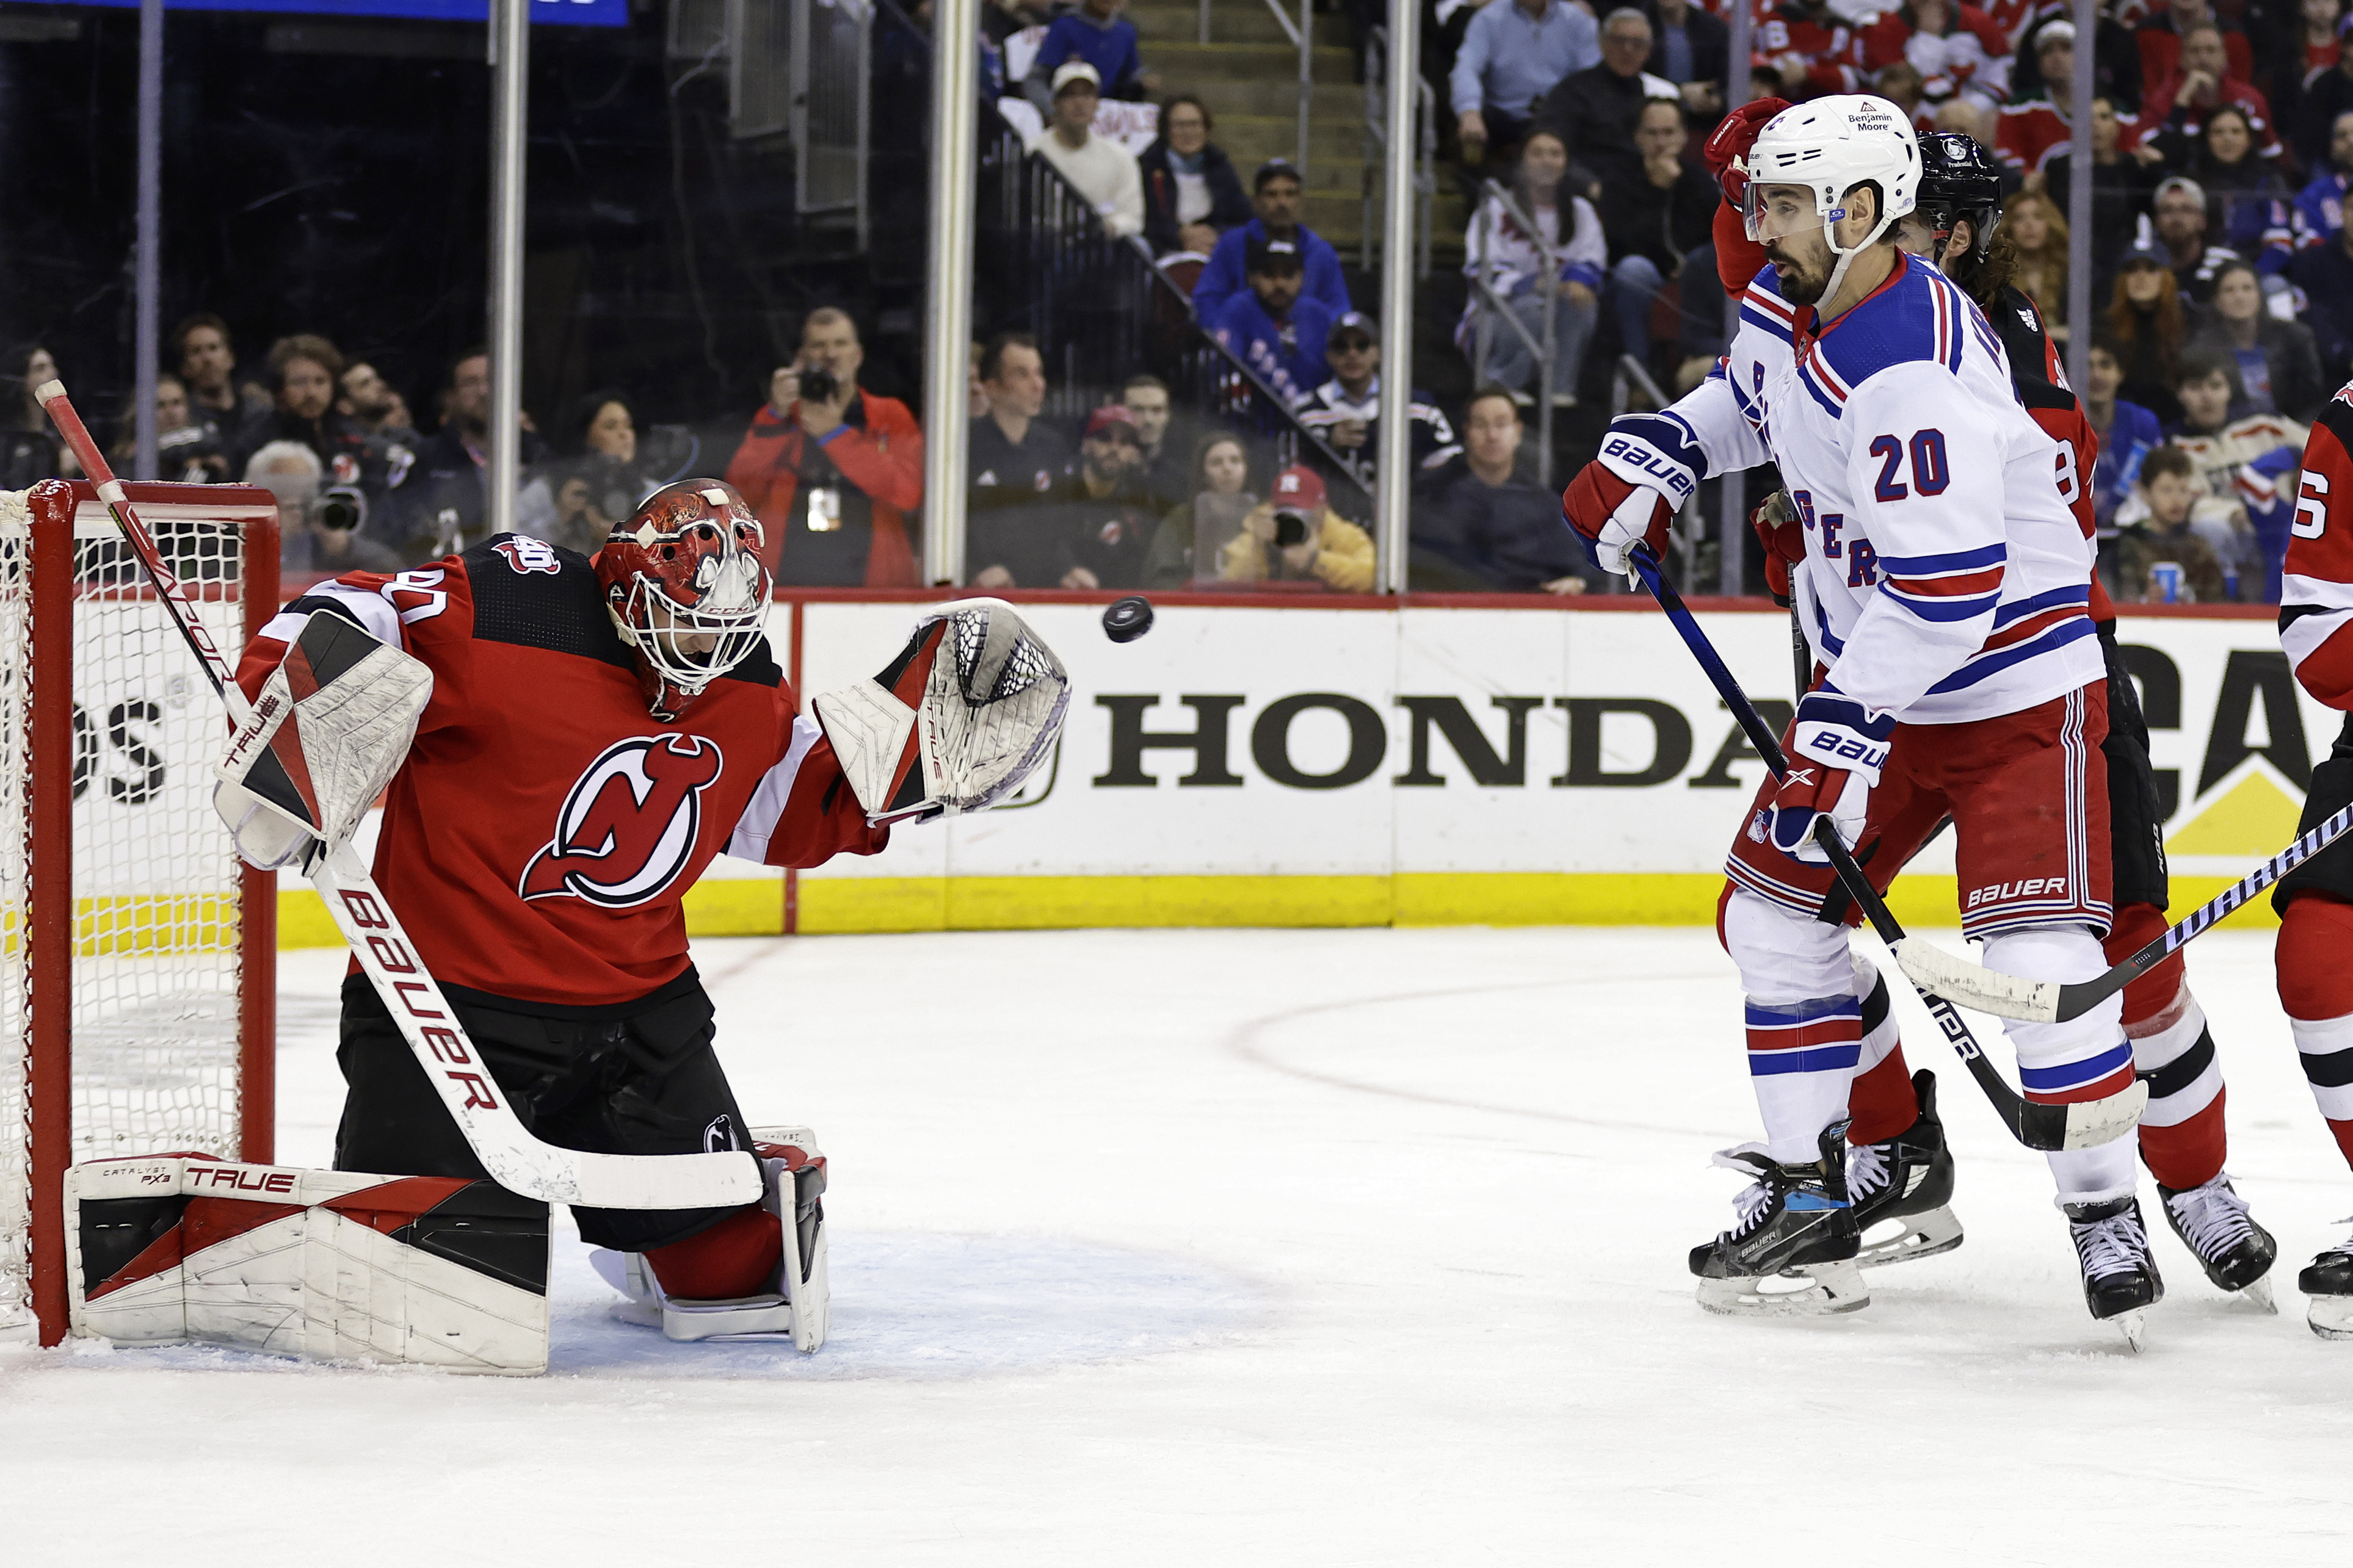 Devils beat Capitals, will face Rangers in 1st round of playoffs